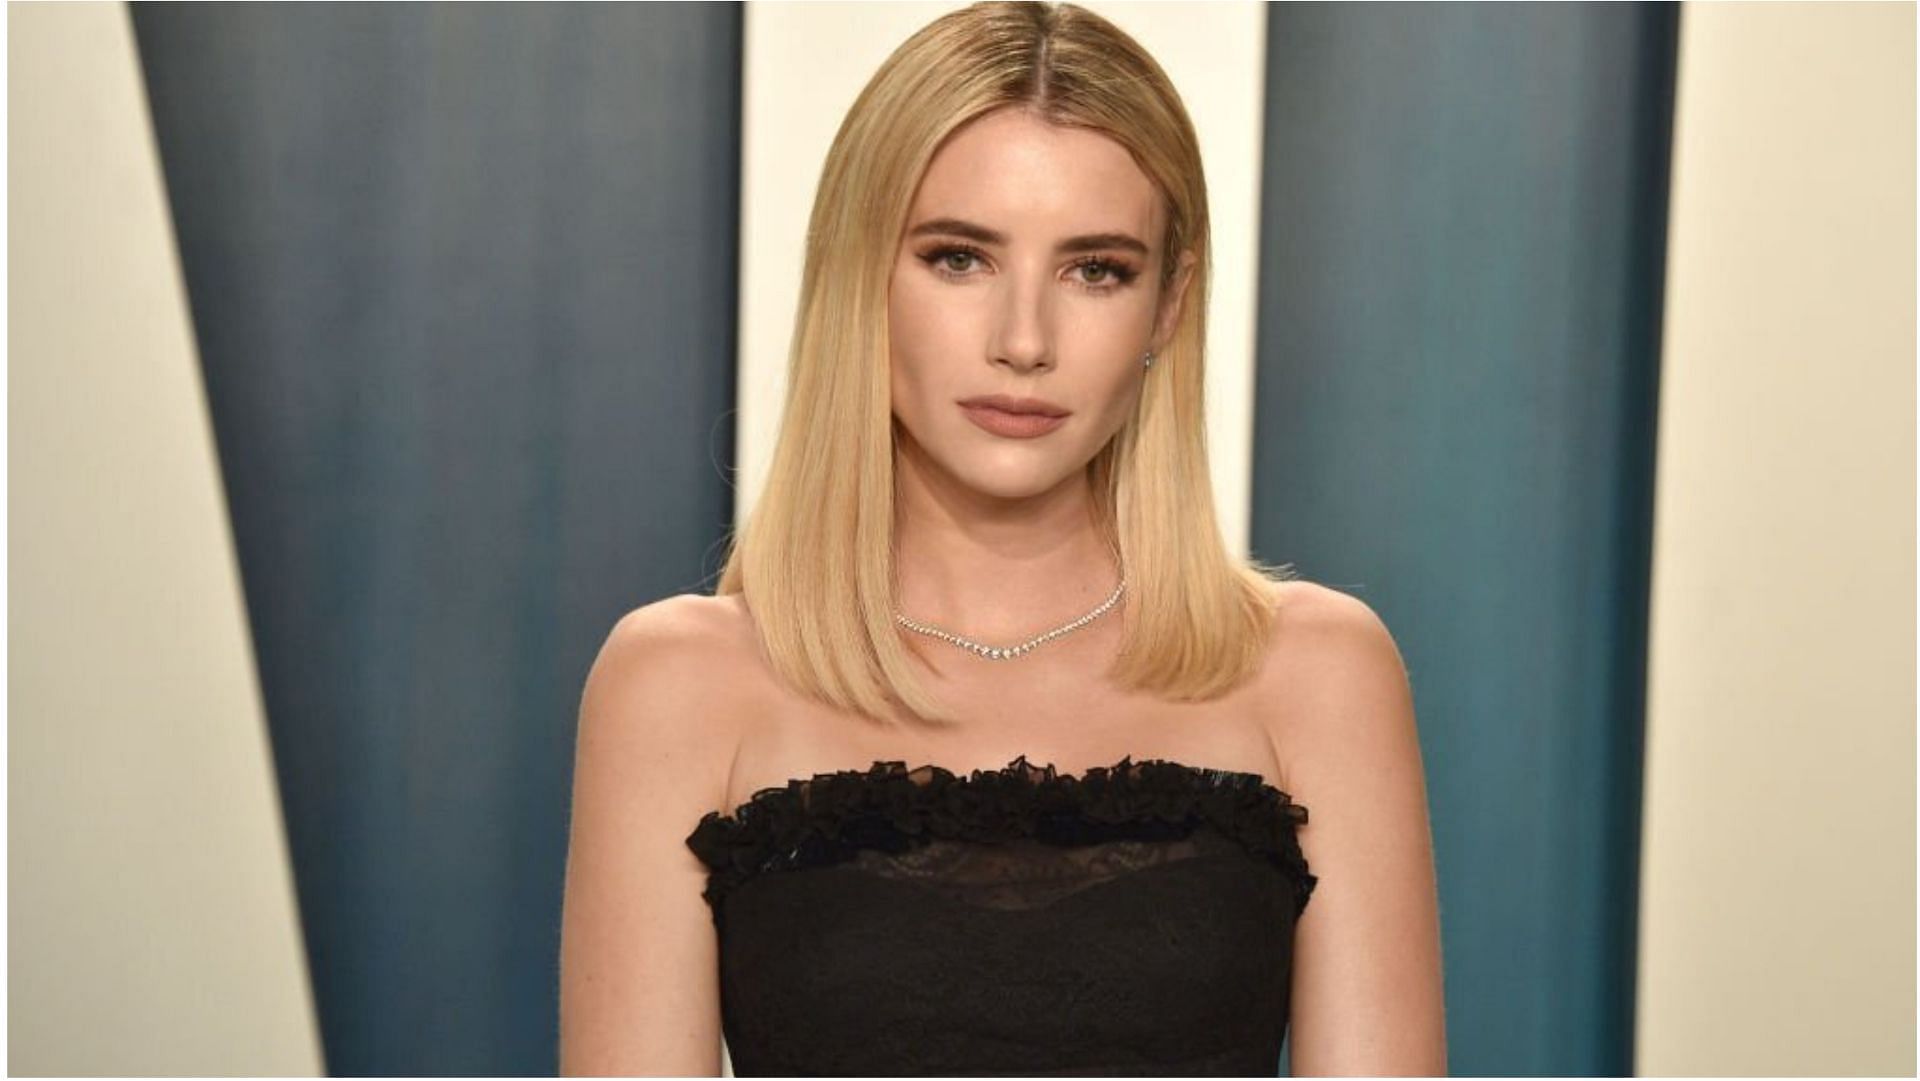 Emma Roberts has been romantically linked to Evan Peters and Garrett Hedlund in the past (Image via David Crotty/Getty Images)